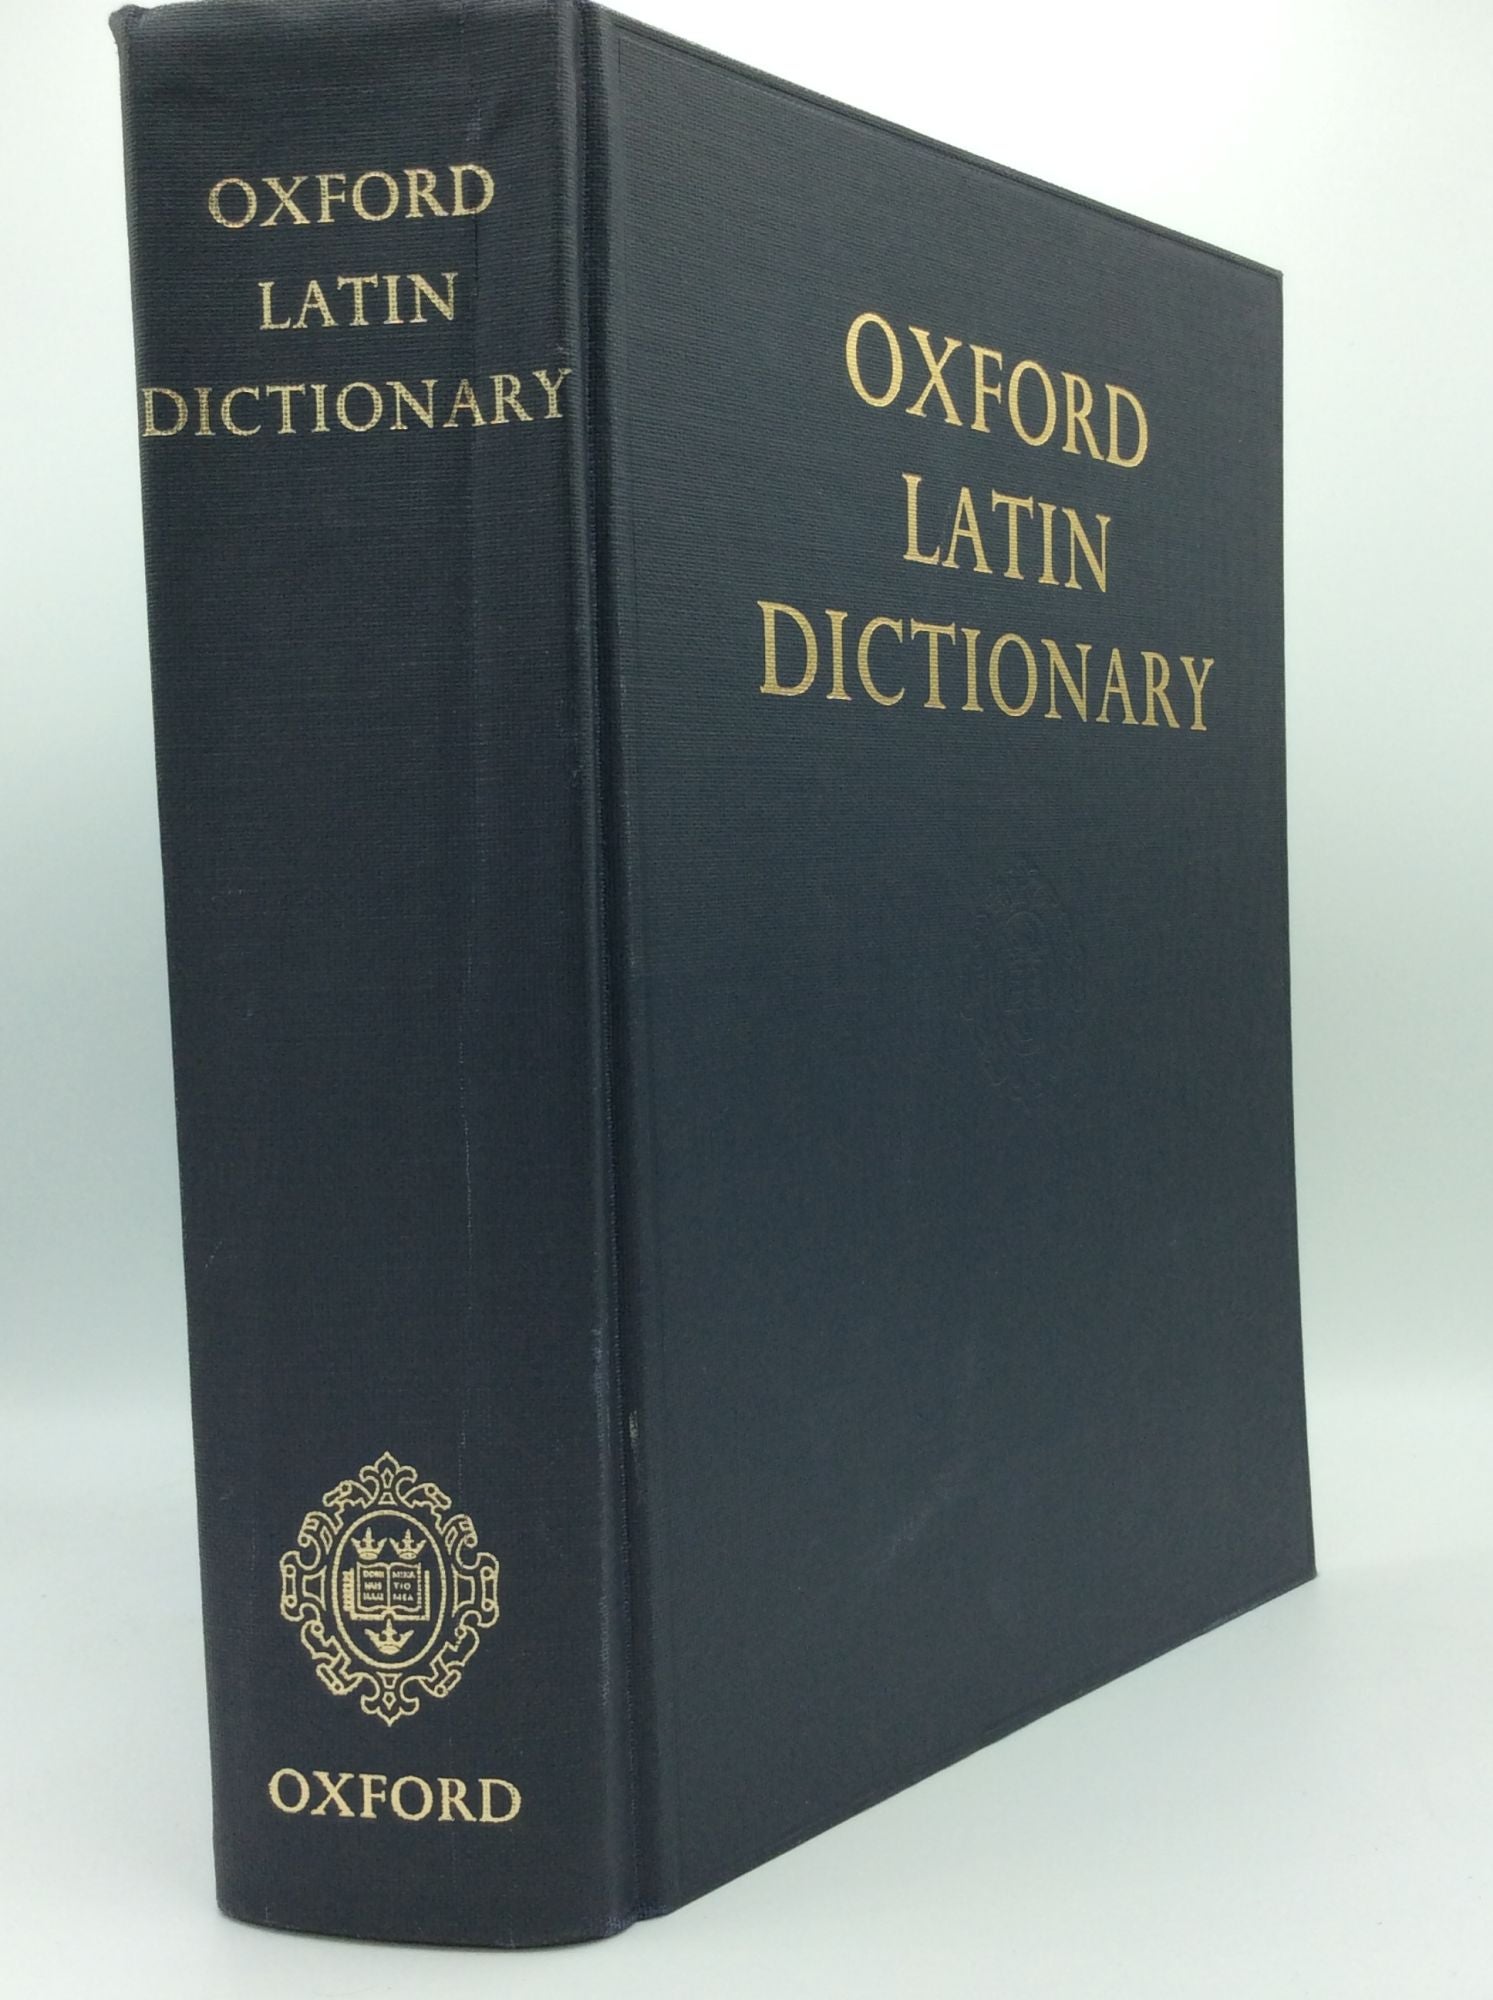 OXFORD LATIN DICTIONARY | ed P G. W. Glare | Combined Edition, 3rd ...